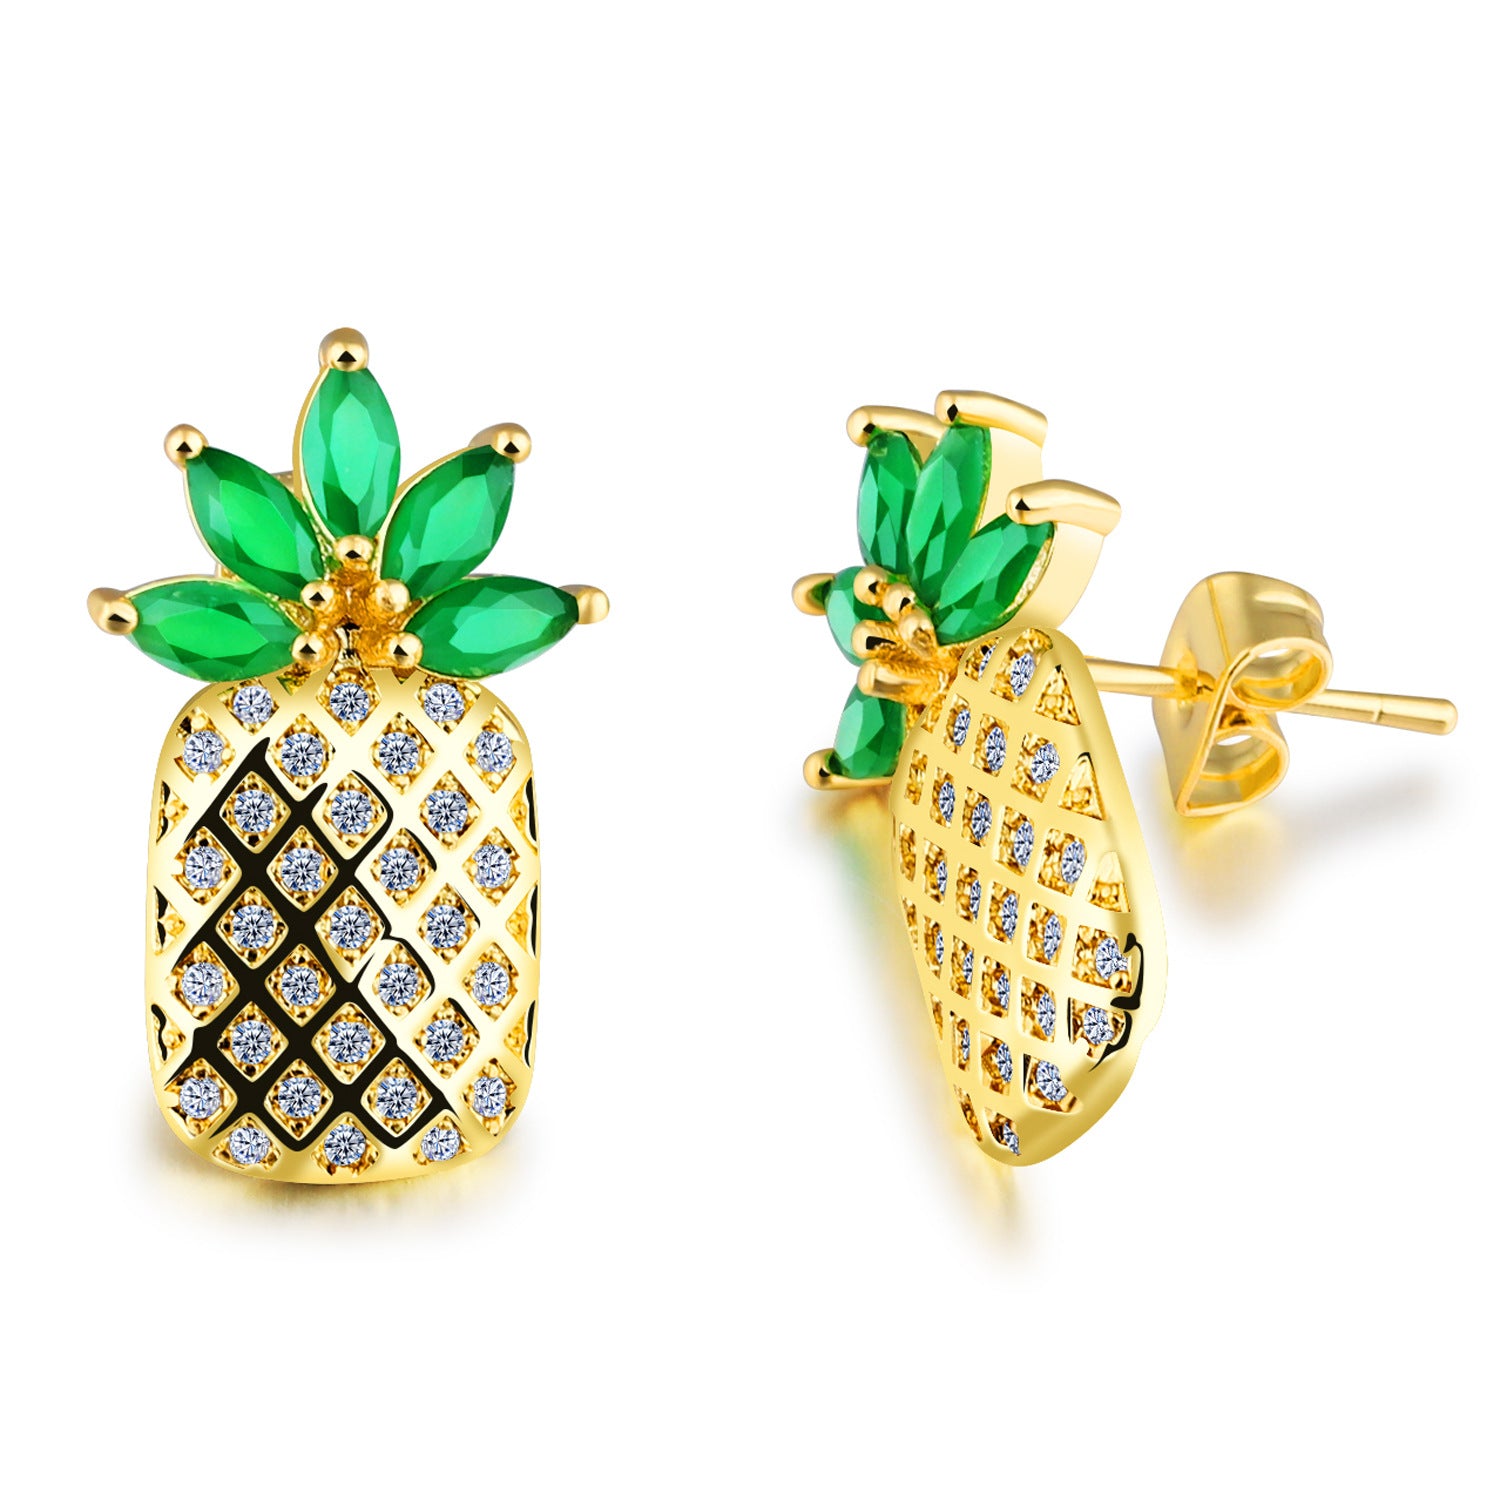 Pineapple Earrings with Cubic Zirconia